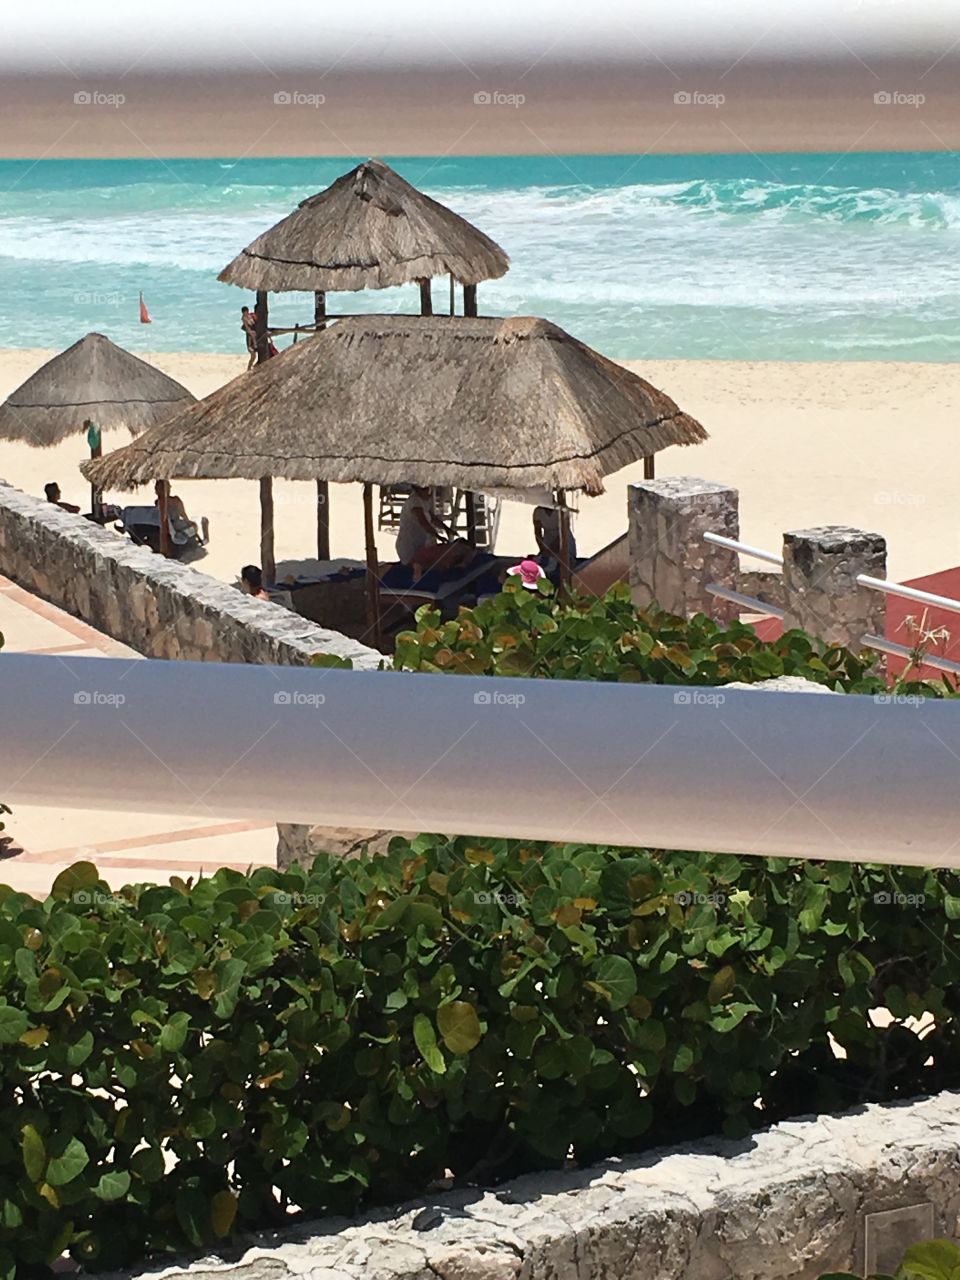 Cancun for friends wedding. Amazing time with friends and family. Destination wedding. Clear water, delicious food 